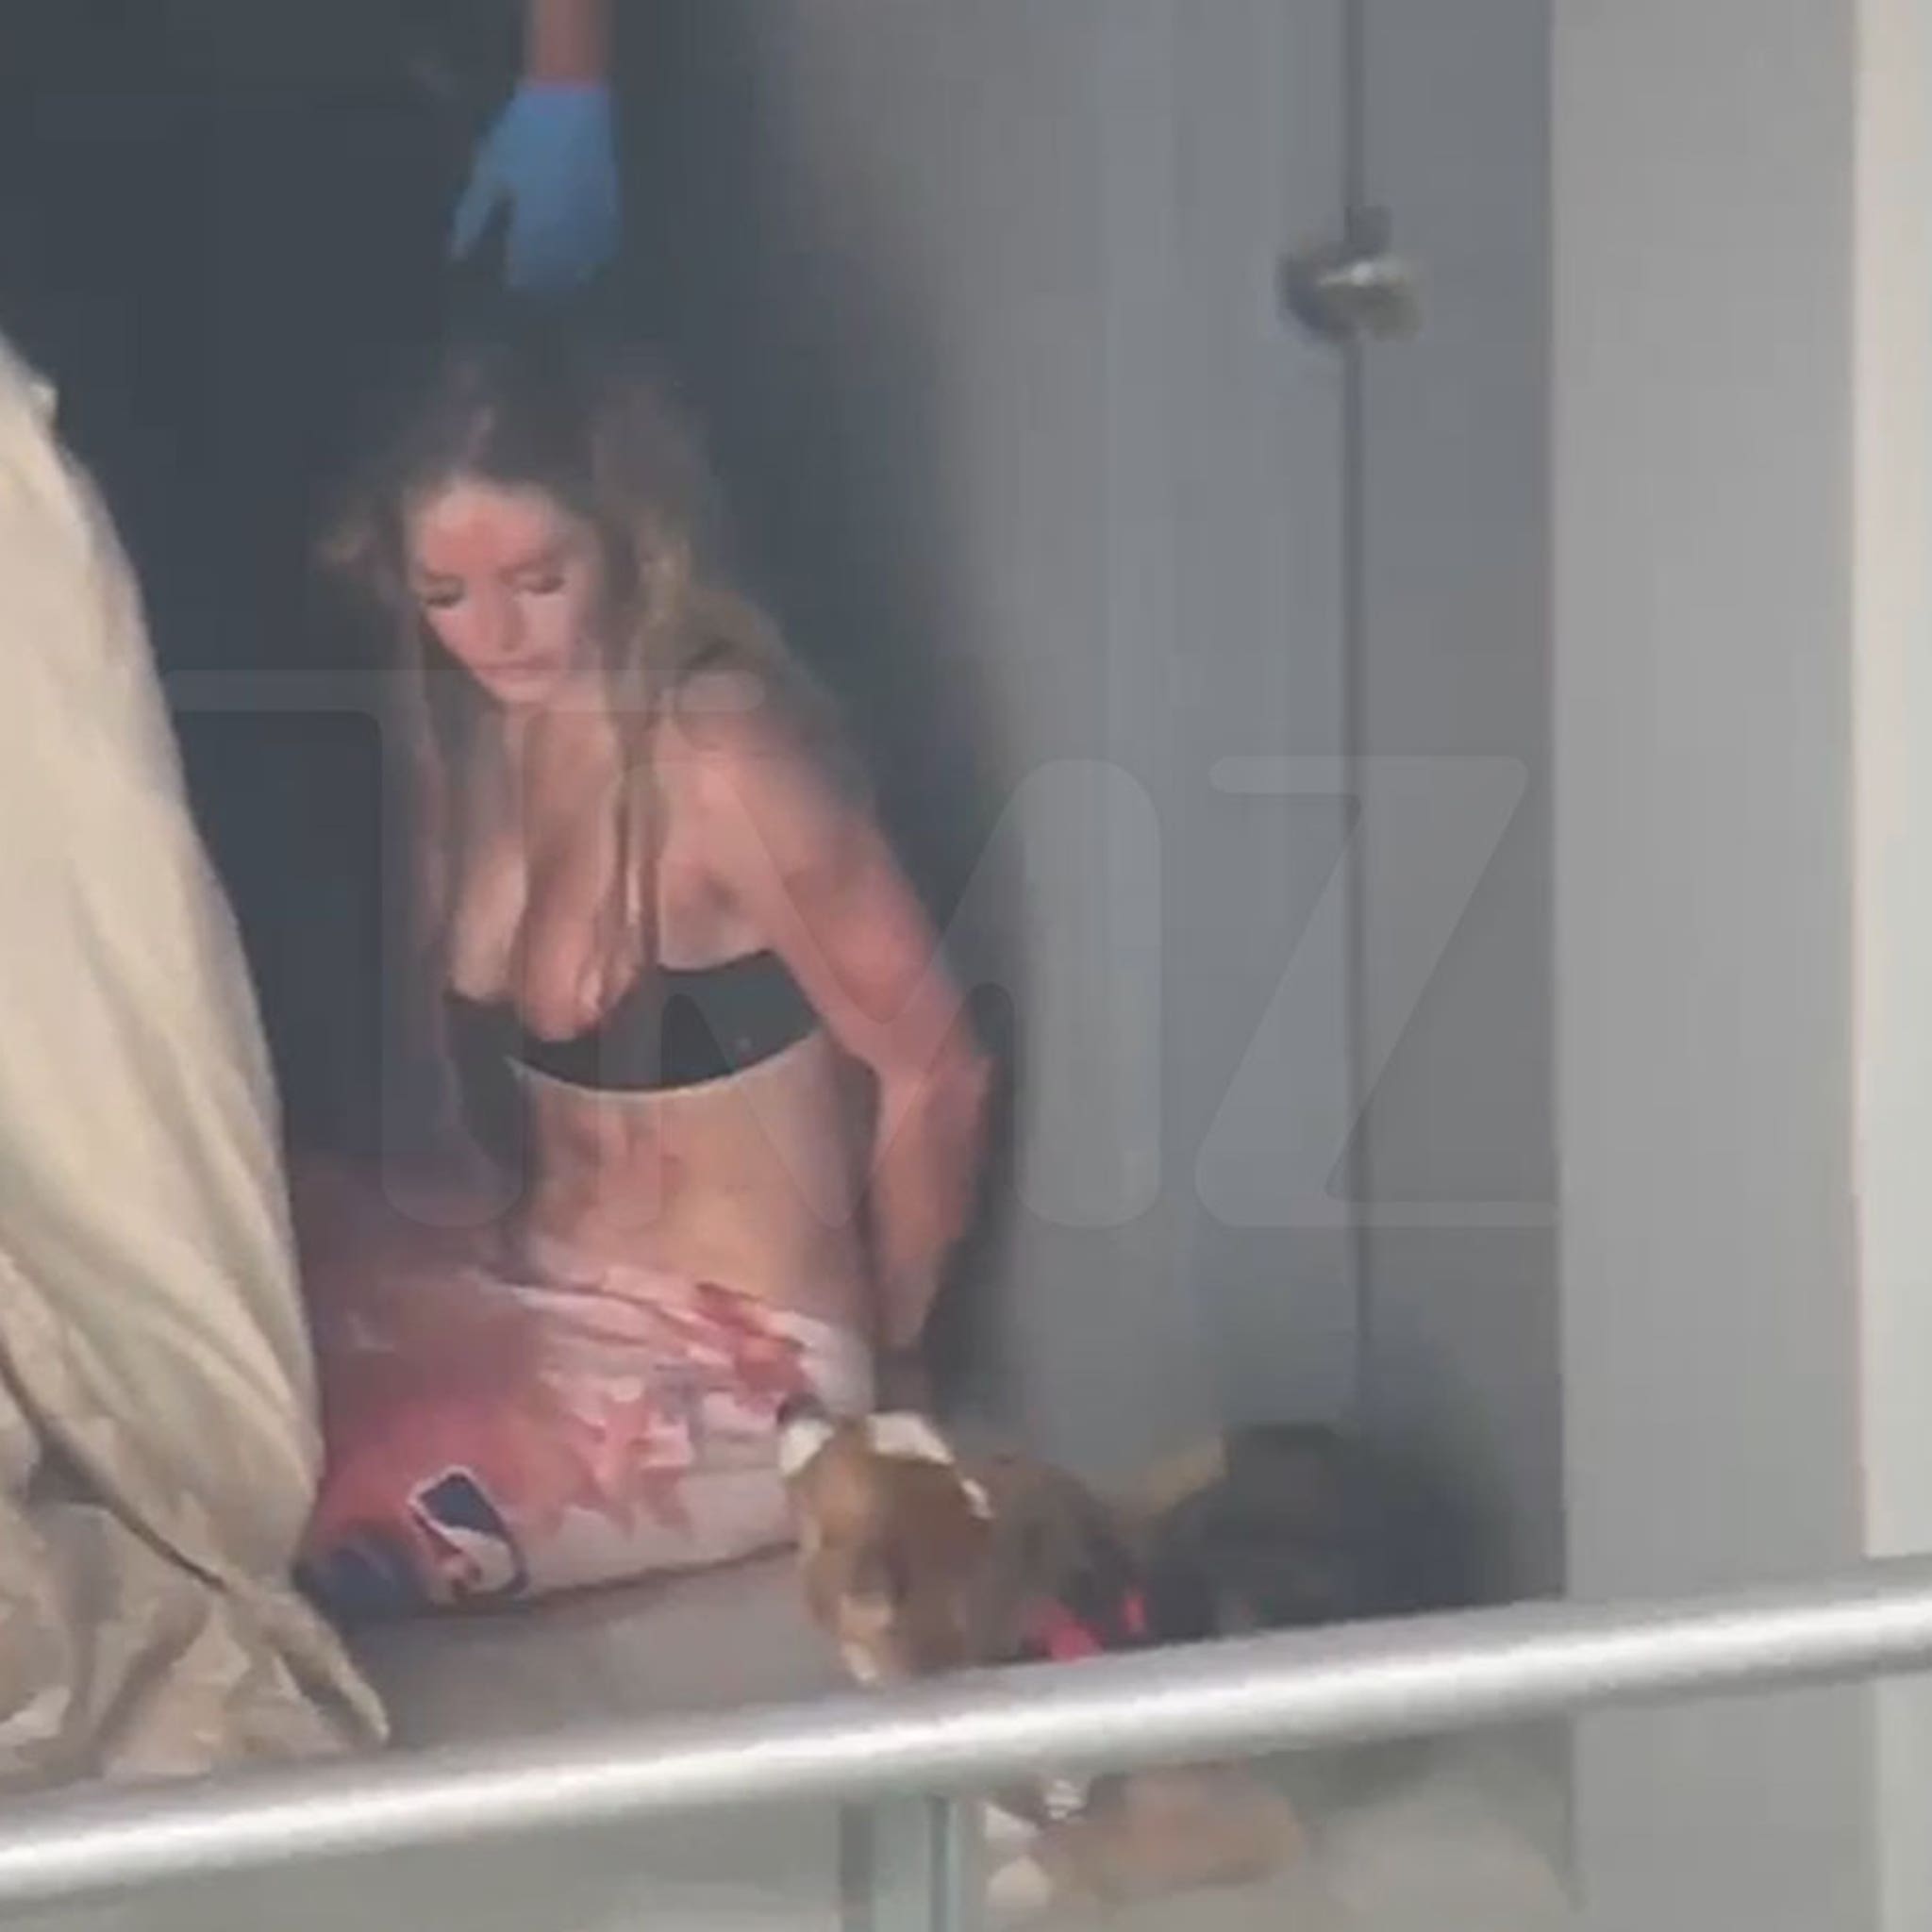 Video From Fatal Miami Stabbing Shows IG Model Covered In Blood picture